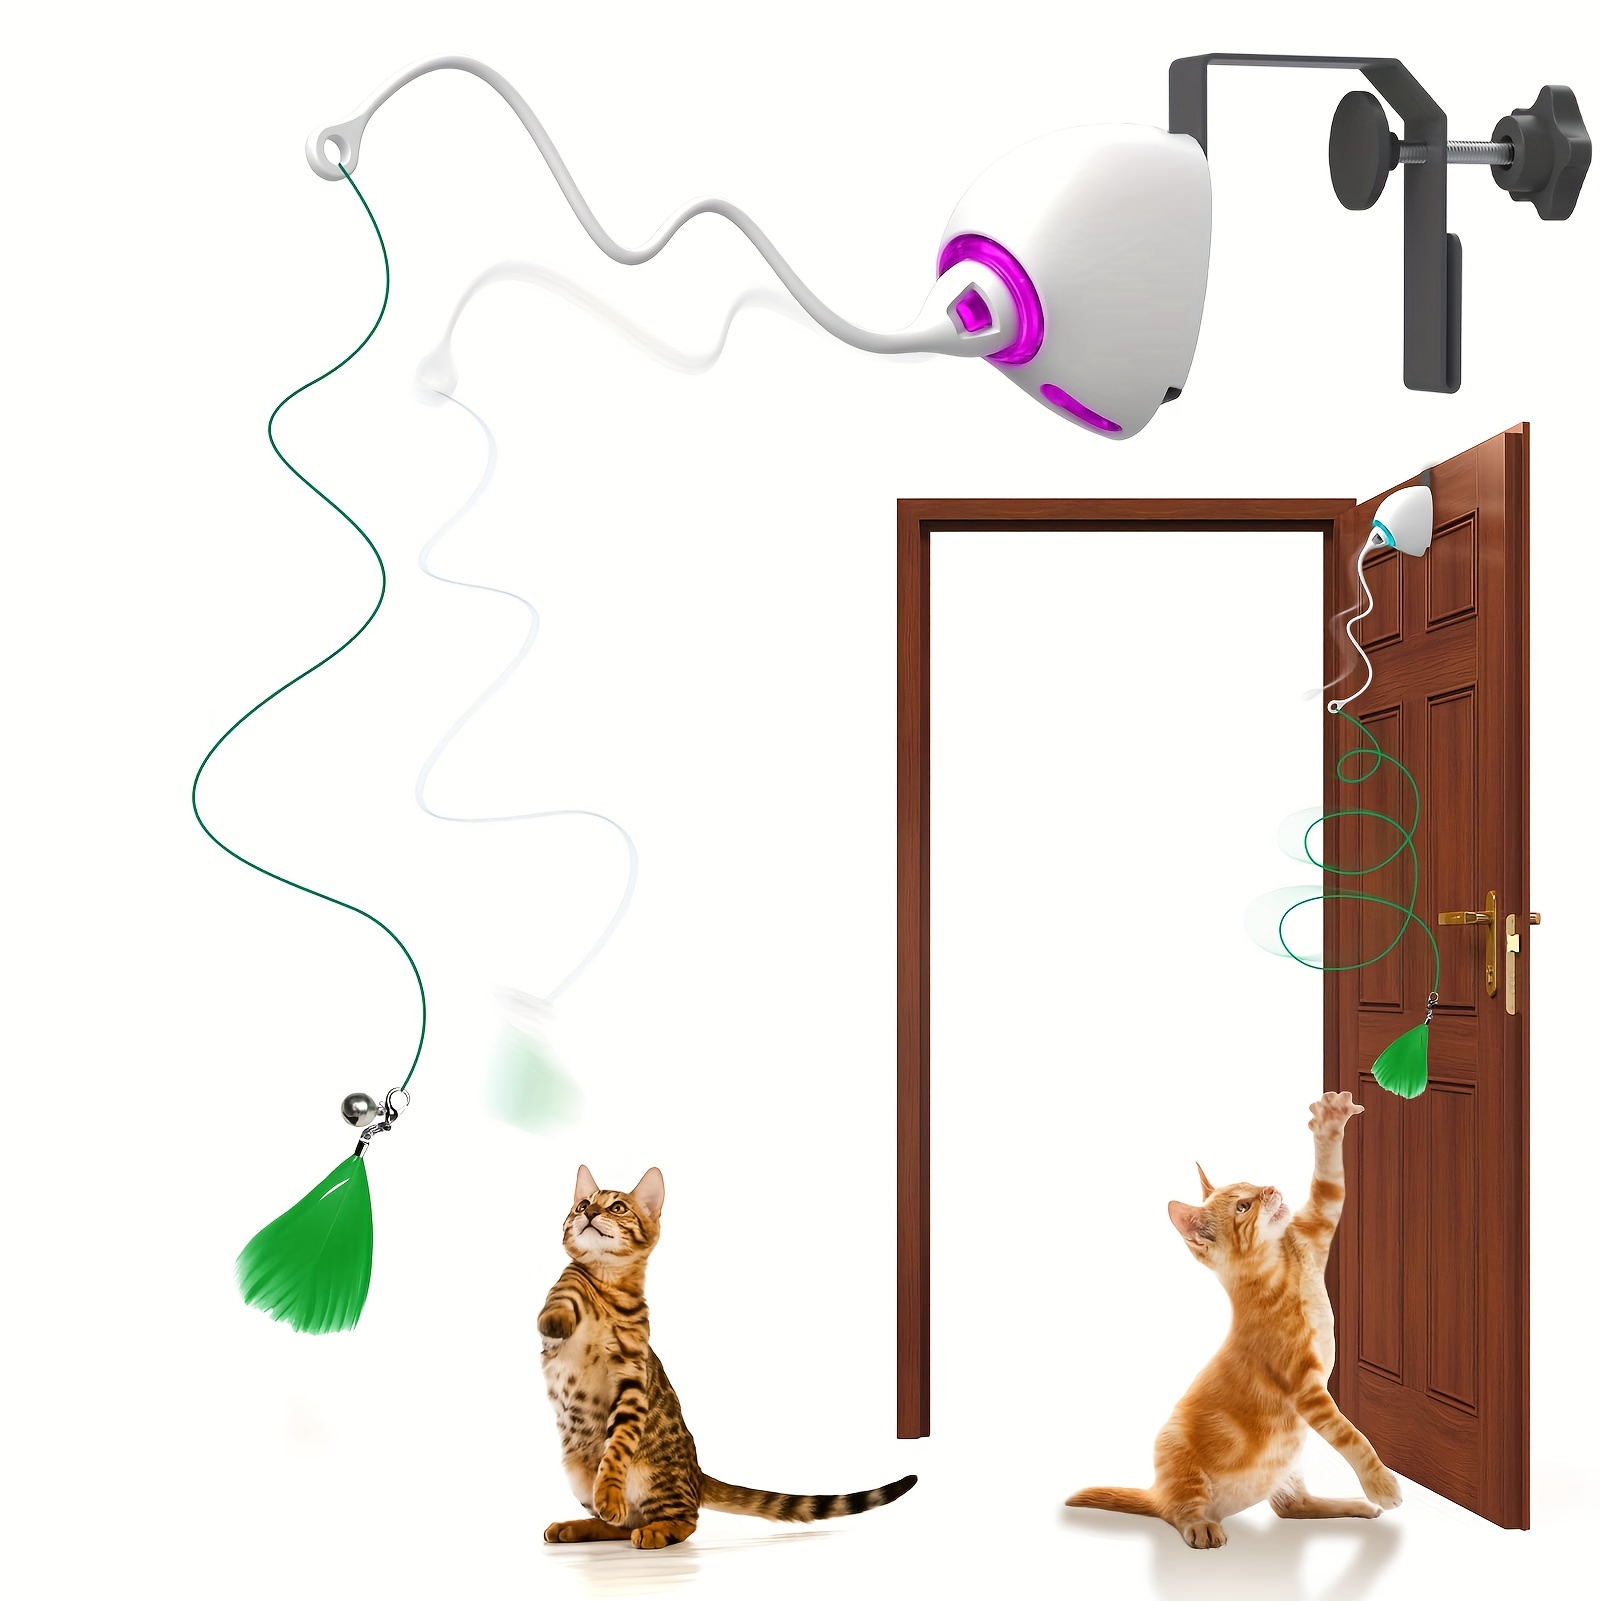 

Smart Cat Toy Interactive Electric Cat Toy - Keep Your Kitten Entertained With Automatic Teasing Rope & Hanging Door Games!